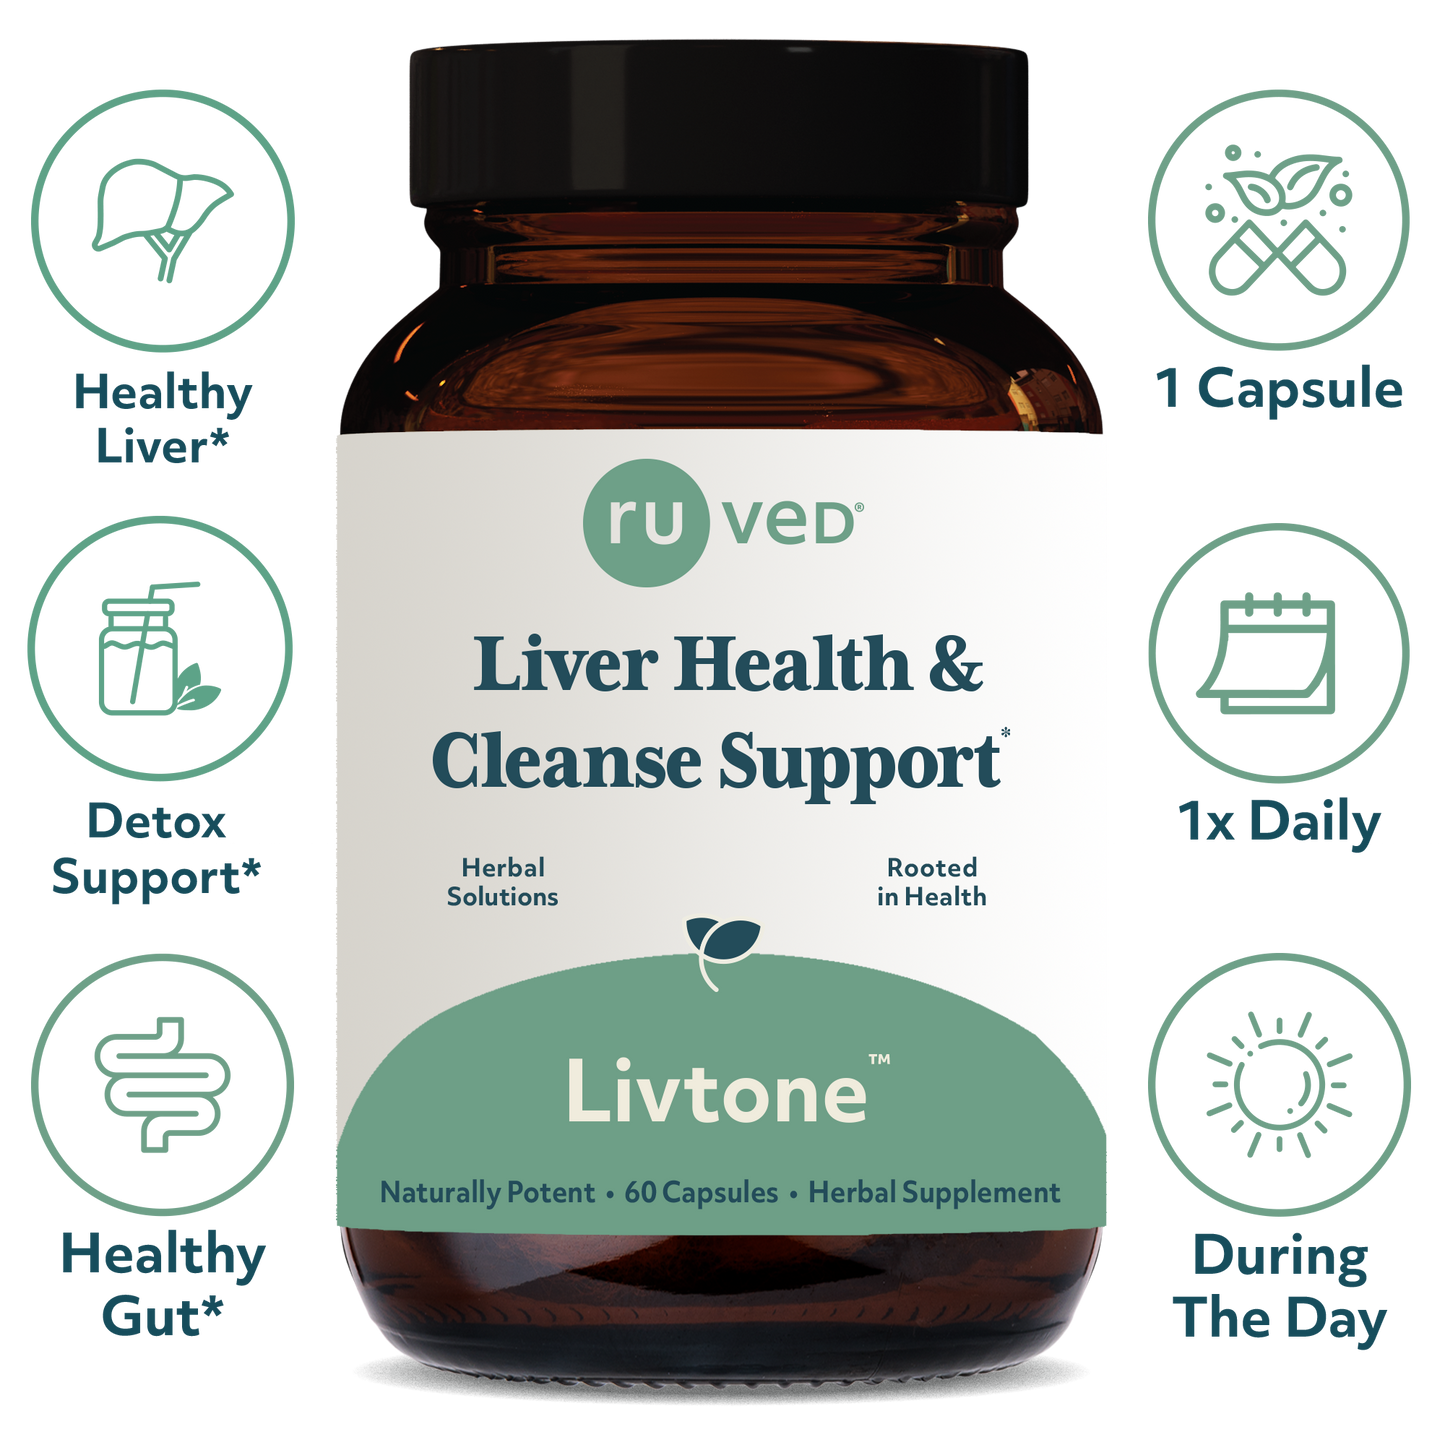 Livtone Capsules Infographic - Herbal Liver Support Formula, 60 Vegetarian Capsules, Promotes Liver Health and Detoxification.